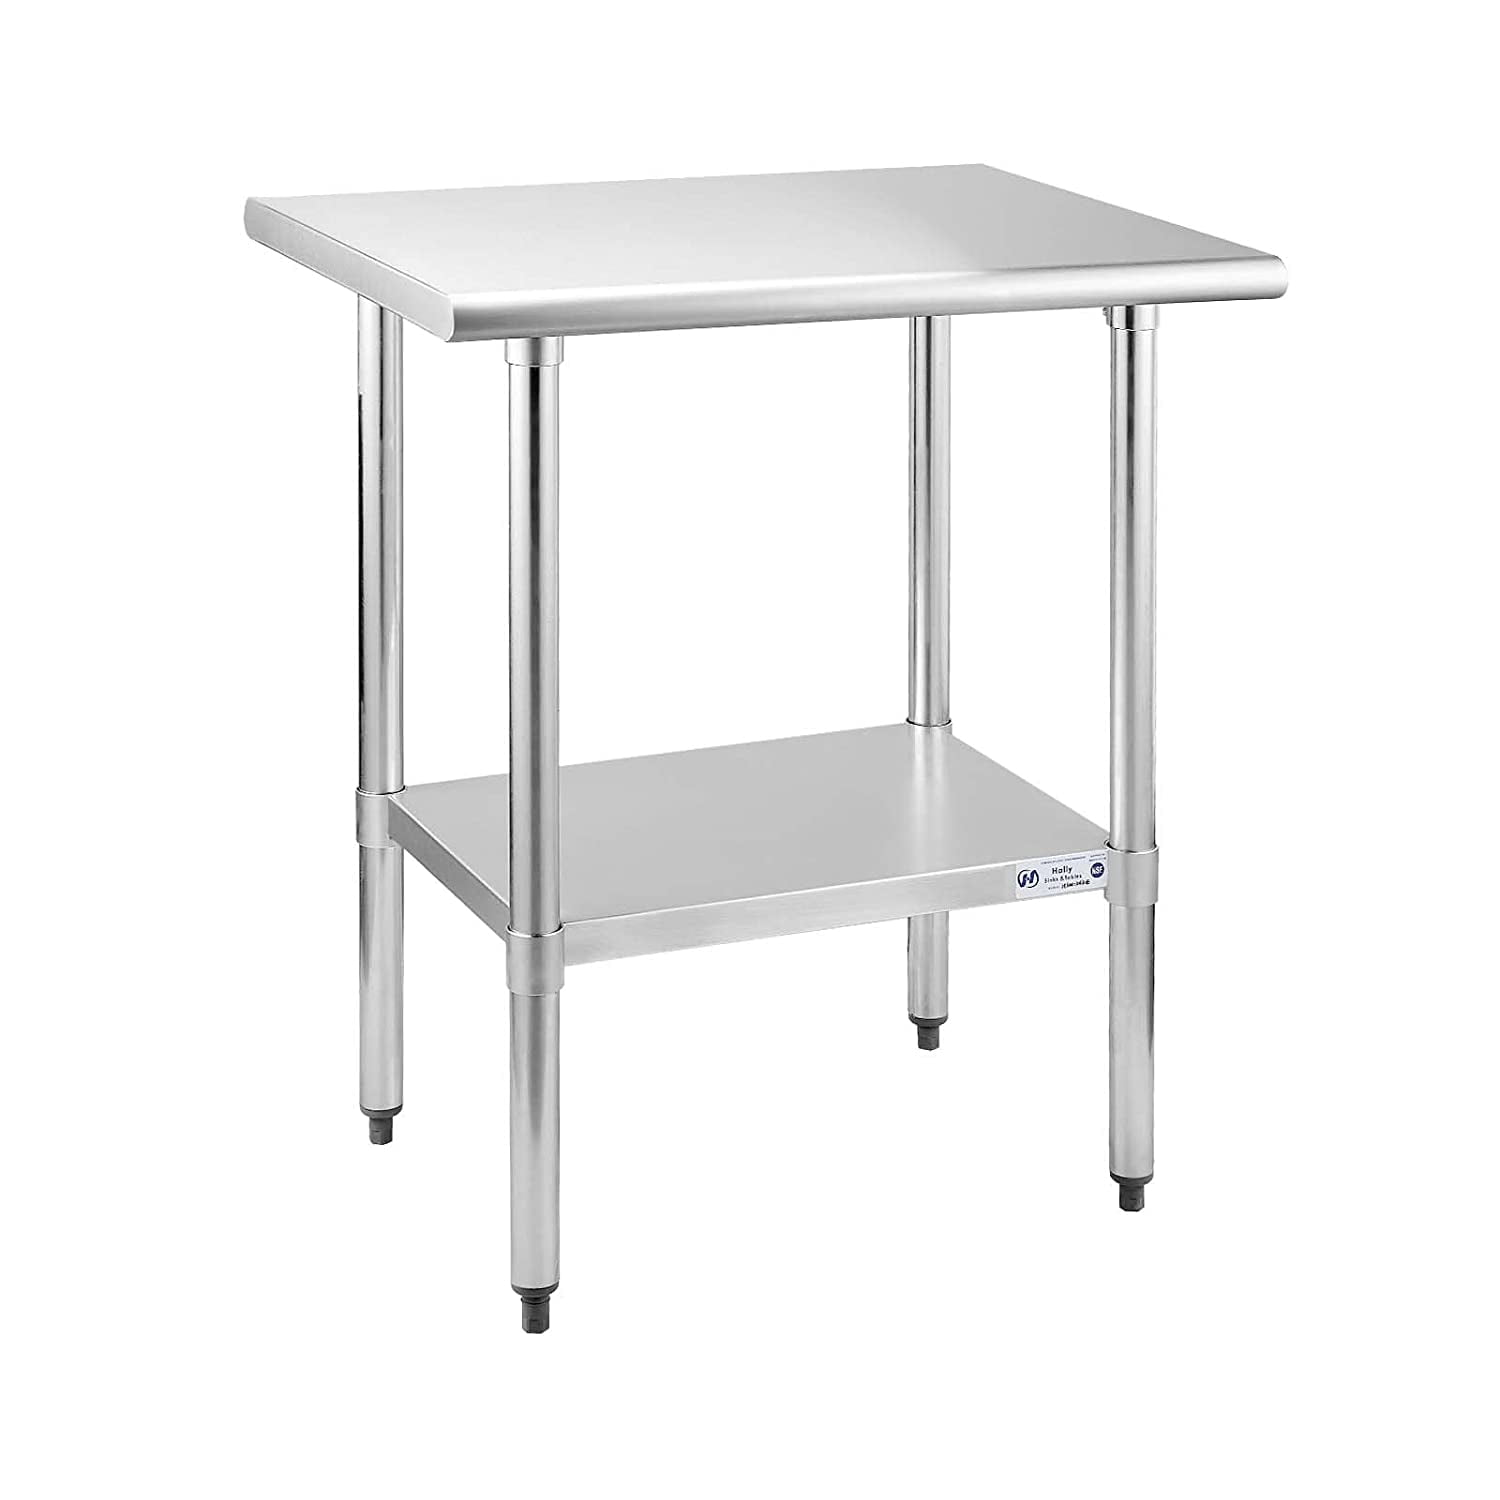 24" x 24" Stainless Steel Work Prep Table Commercial Kitchen Restaurant 60X60X80 